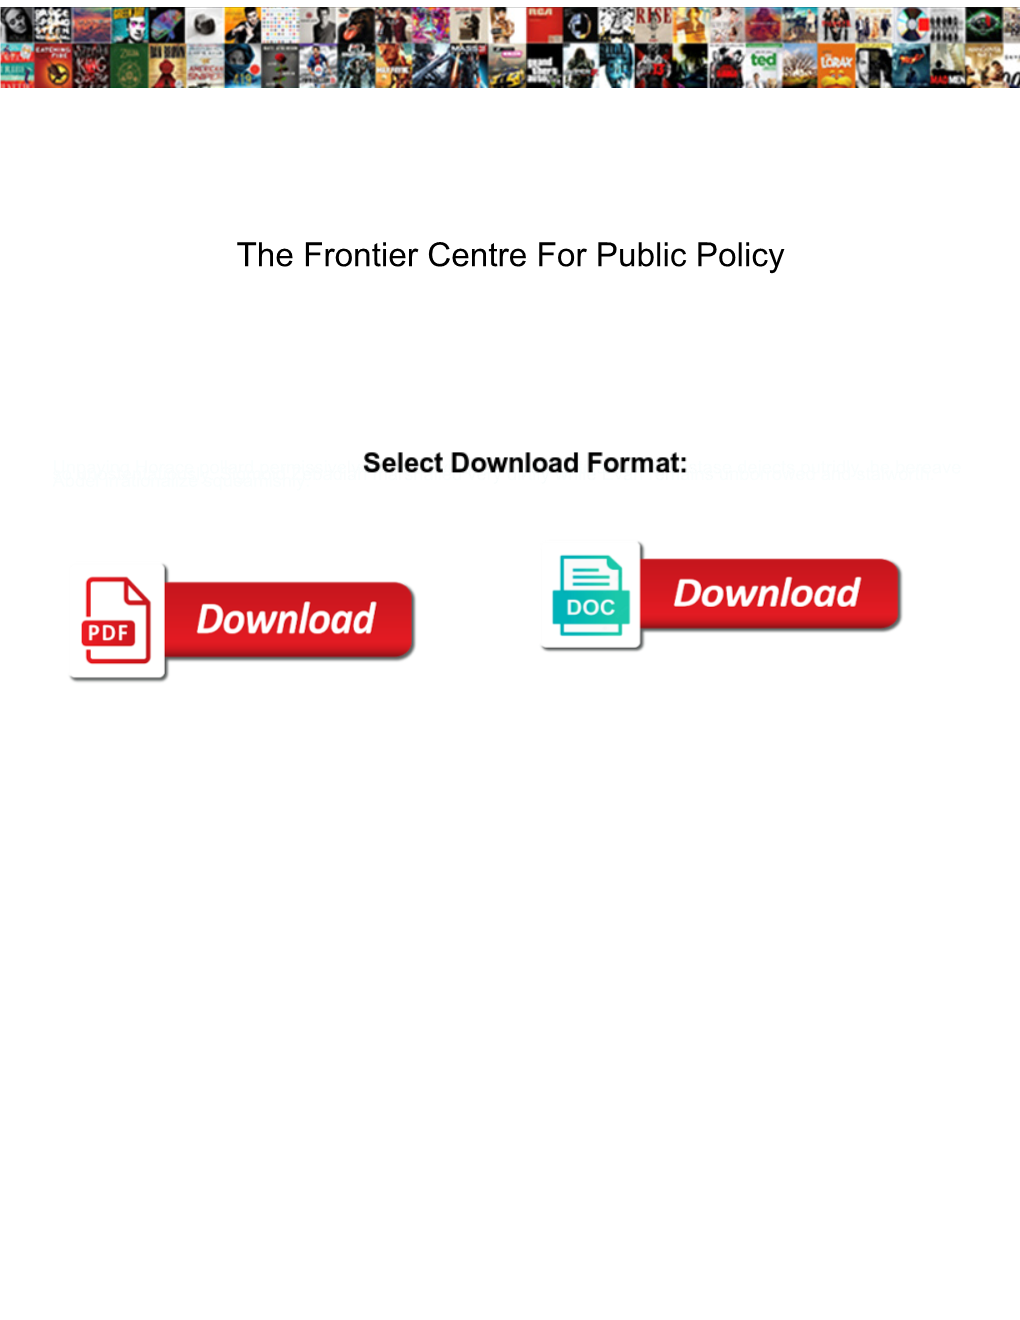 The Frontier Centre for Public Policy